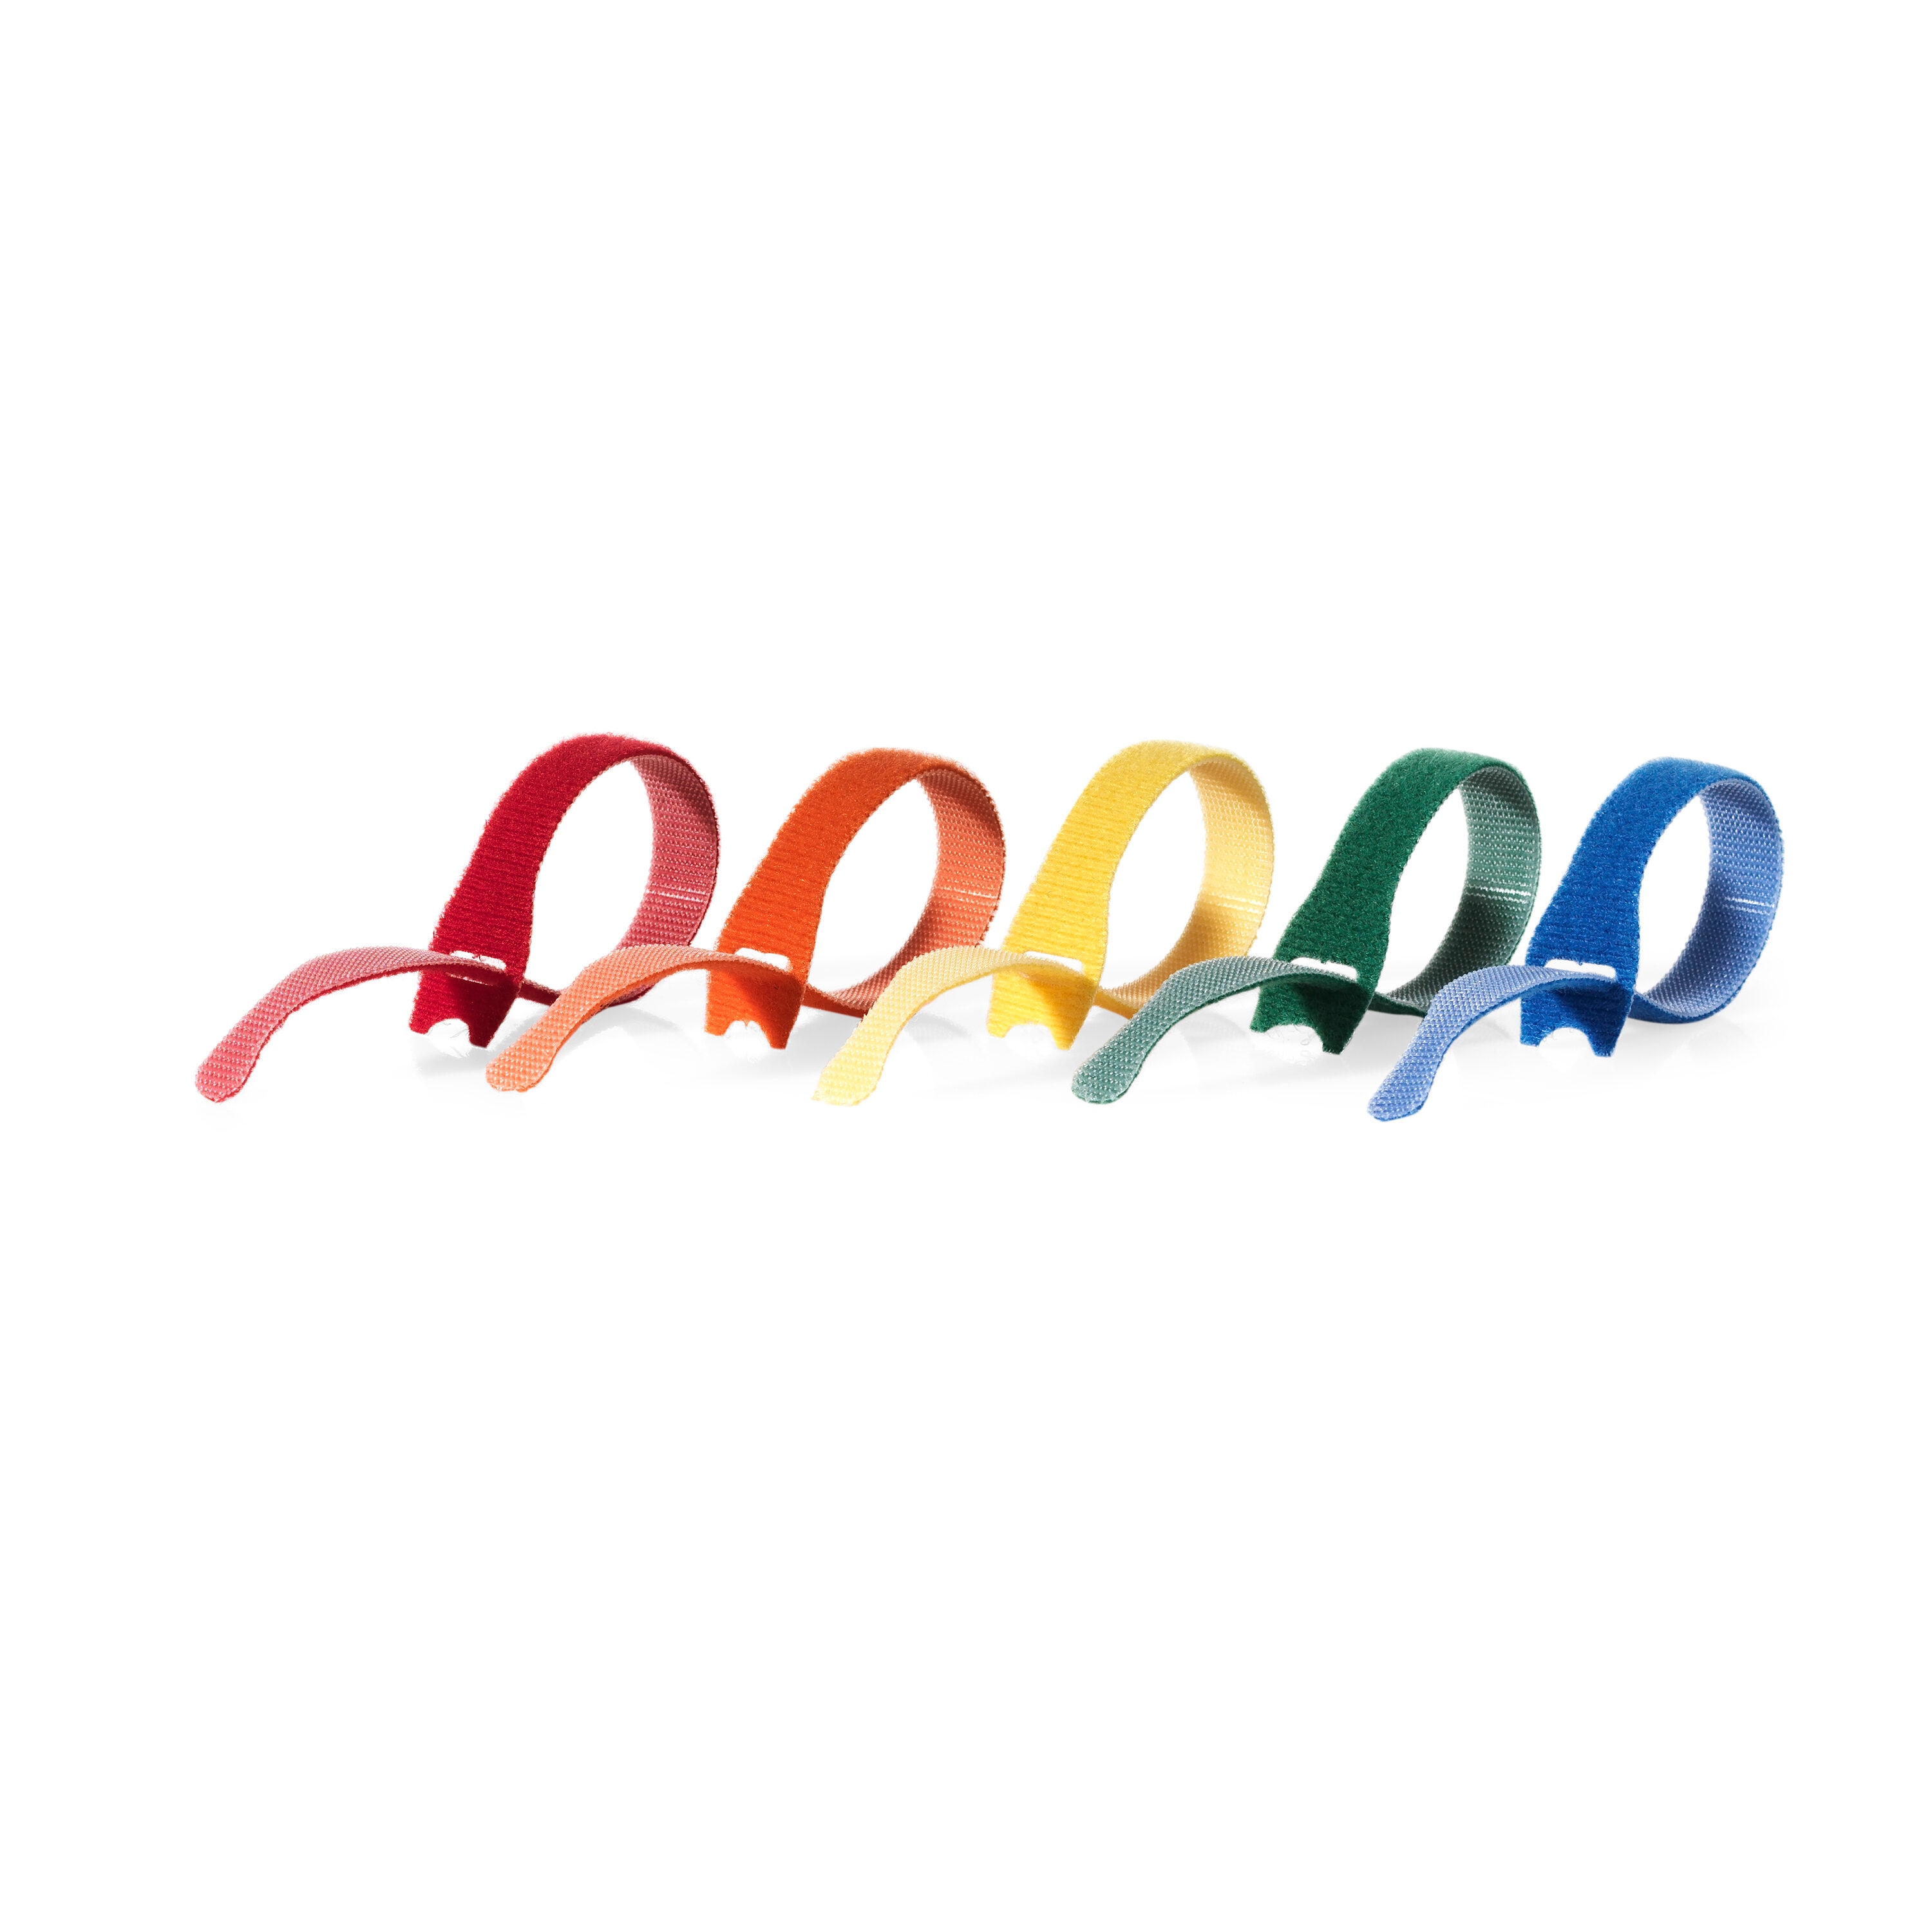 VELCRO 8 in. x 1/2 in. Multi-Color One-Wrap Straps (5-Pack